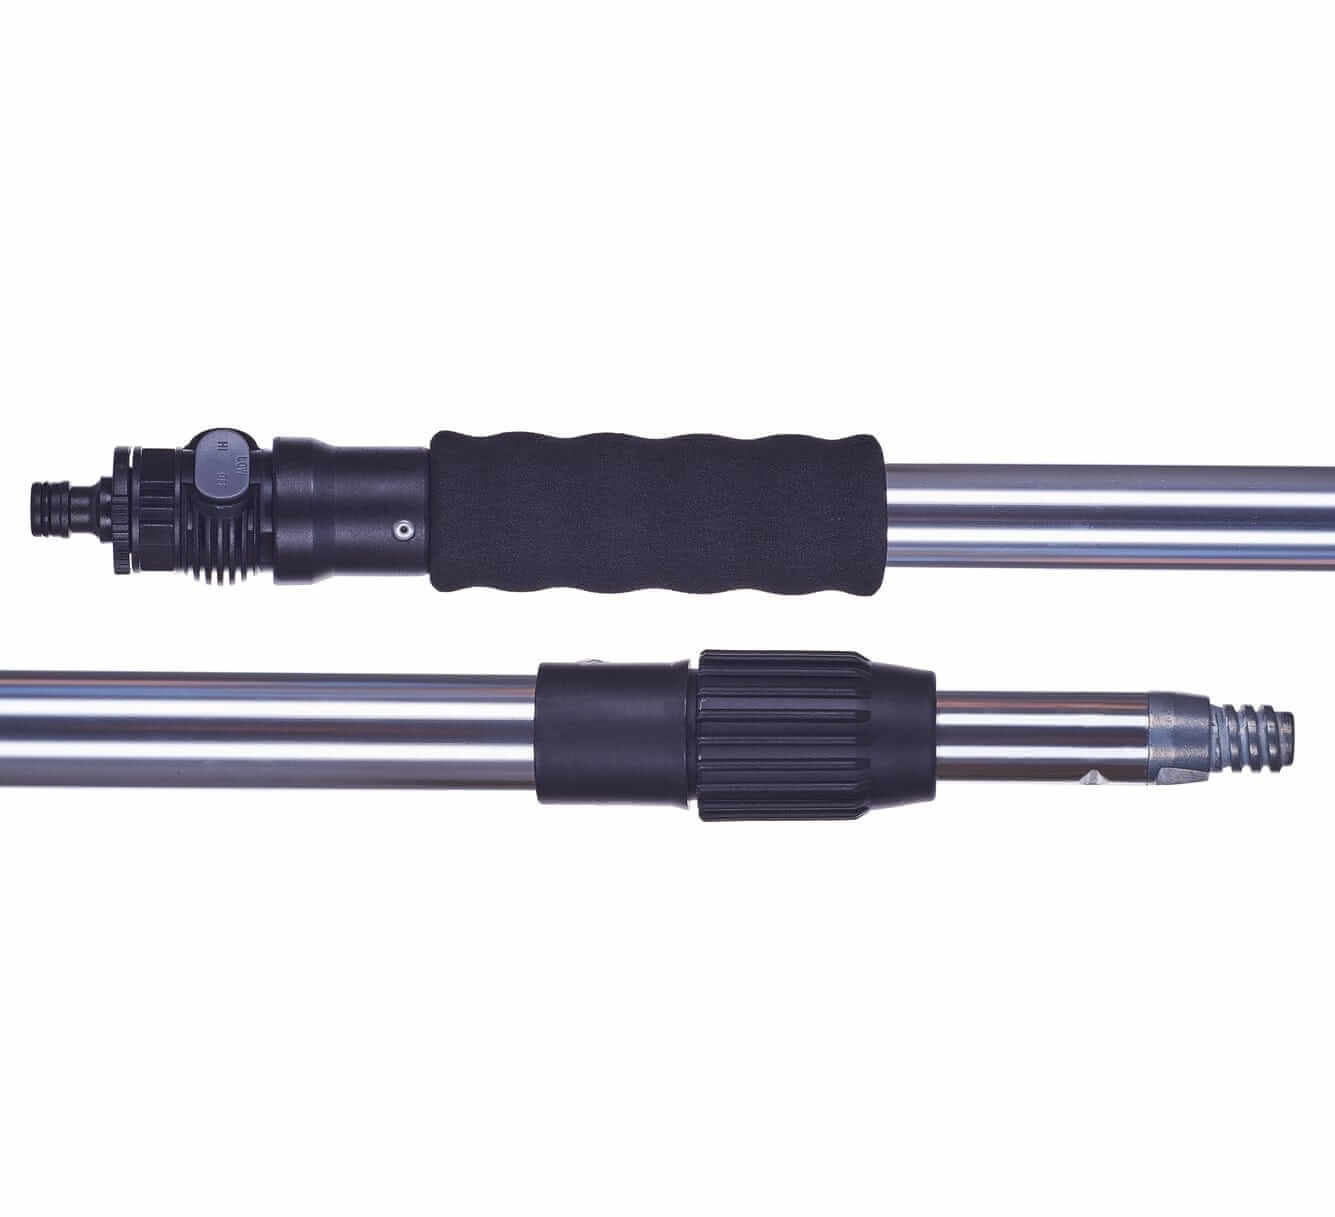 Telescopic rod POLE 2 x 1.5 m with water connection